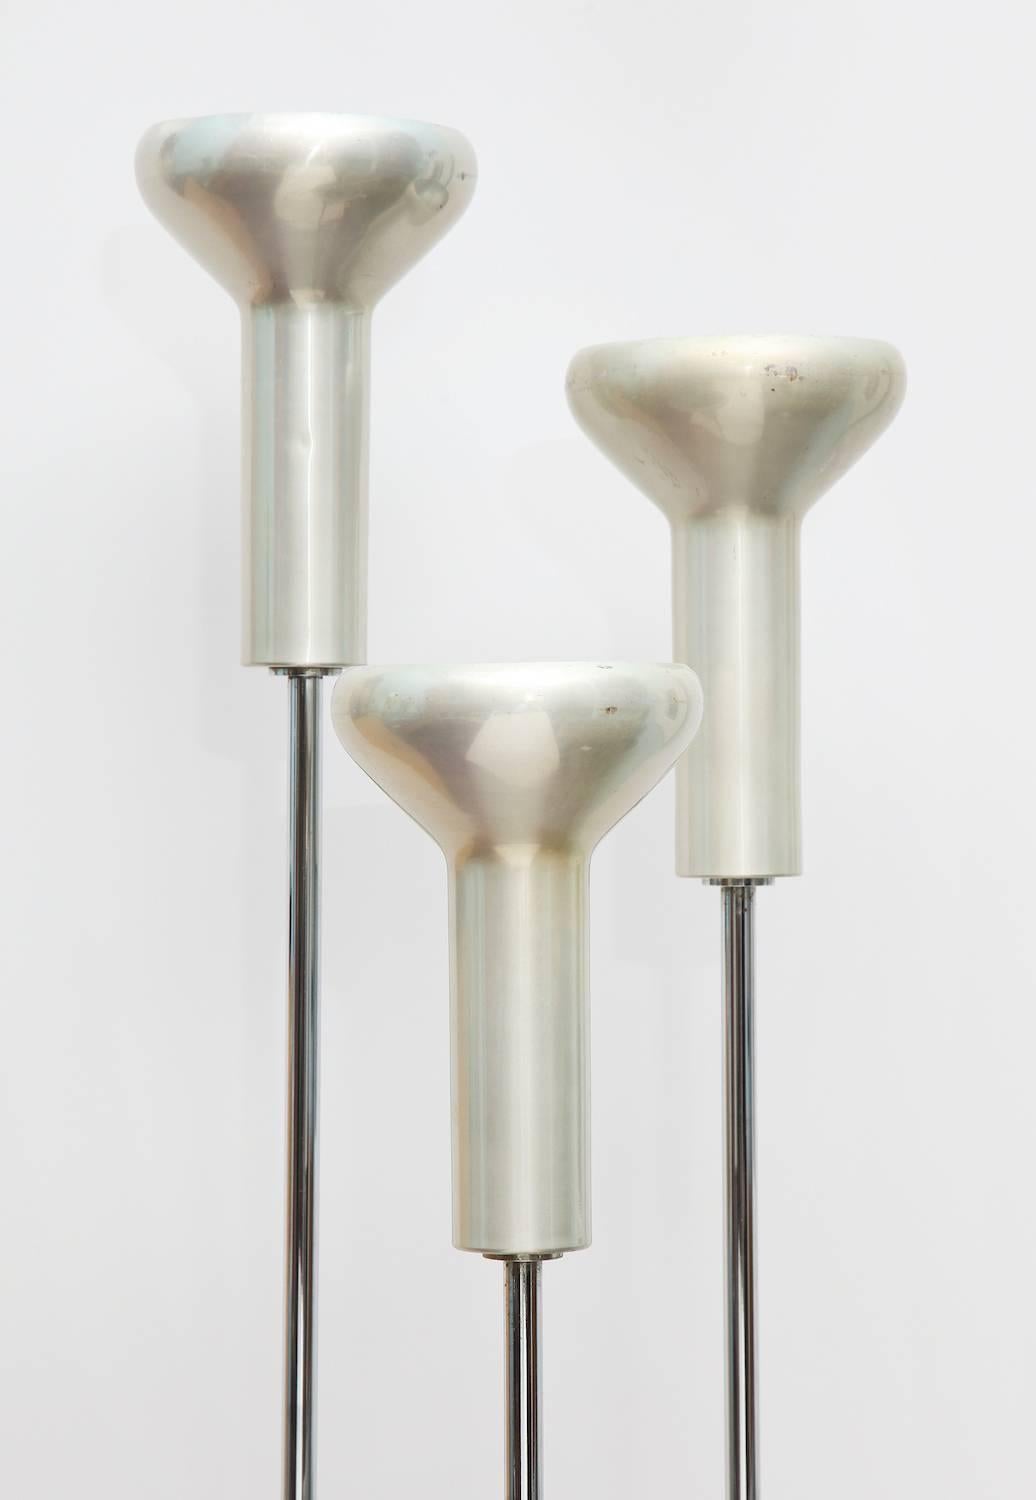 Set of three floor lamps, by Gino Sarfatti for Arteluce.  Model # 1073, architectural cluster floor lamps. Black, enameled steel bases with chrome plated steel and aluminum heads. Bases are designed to fit inside of each other creating a